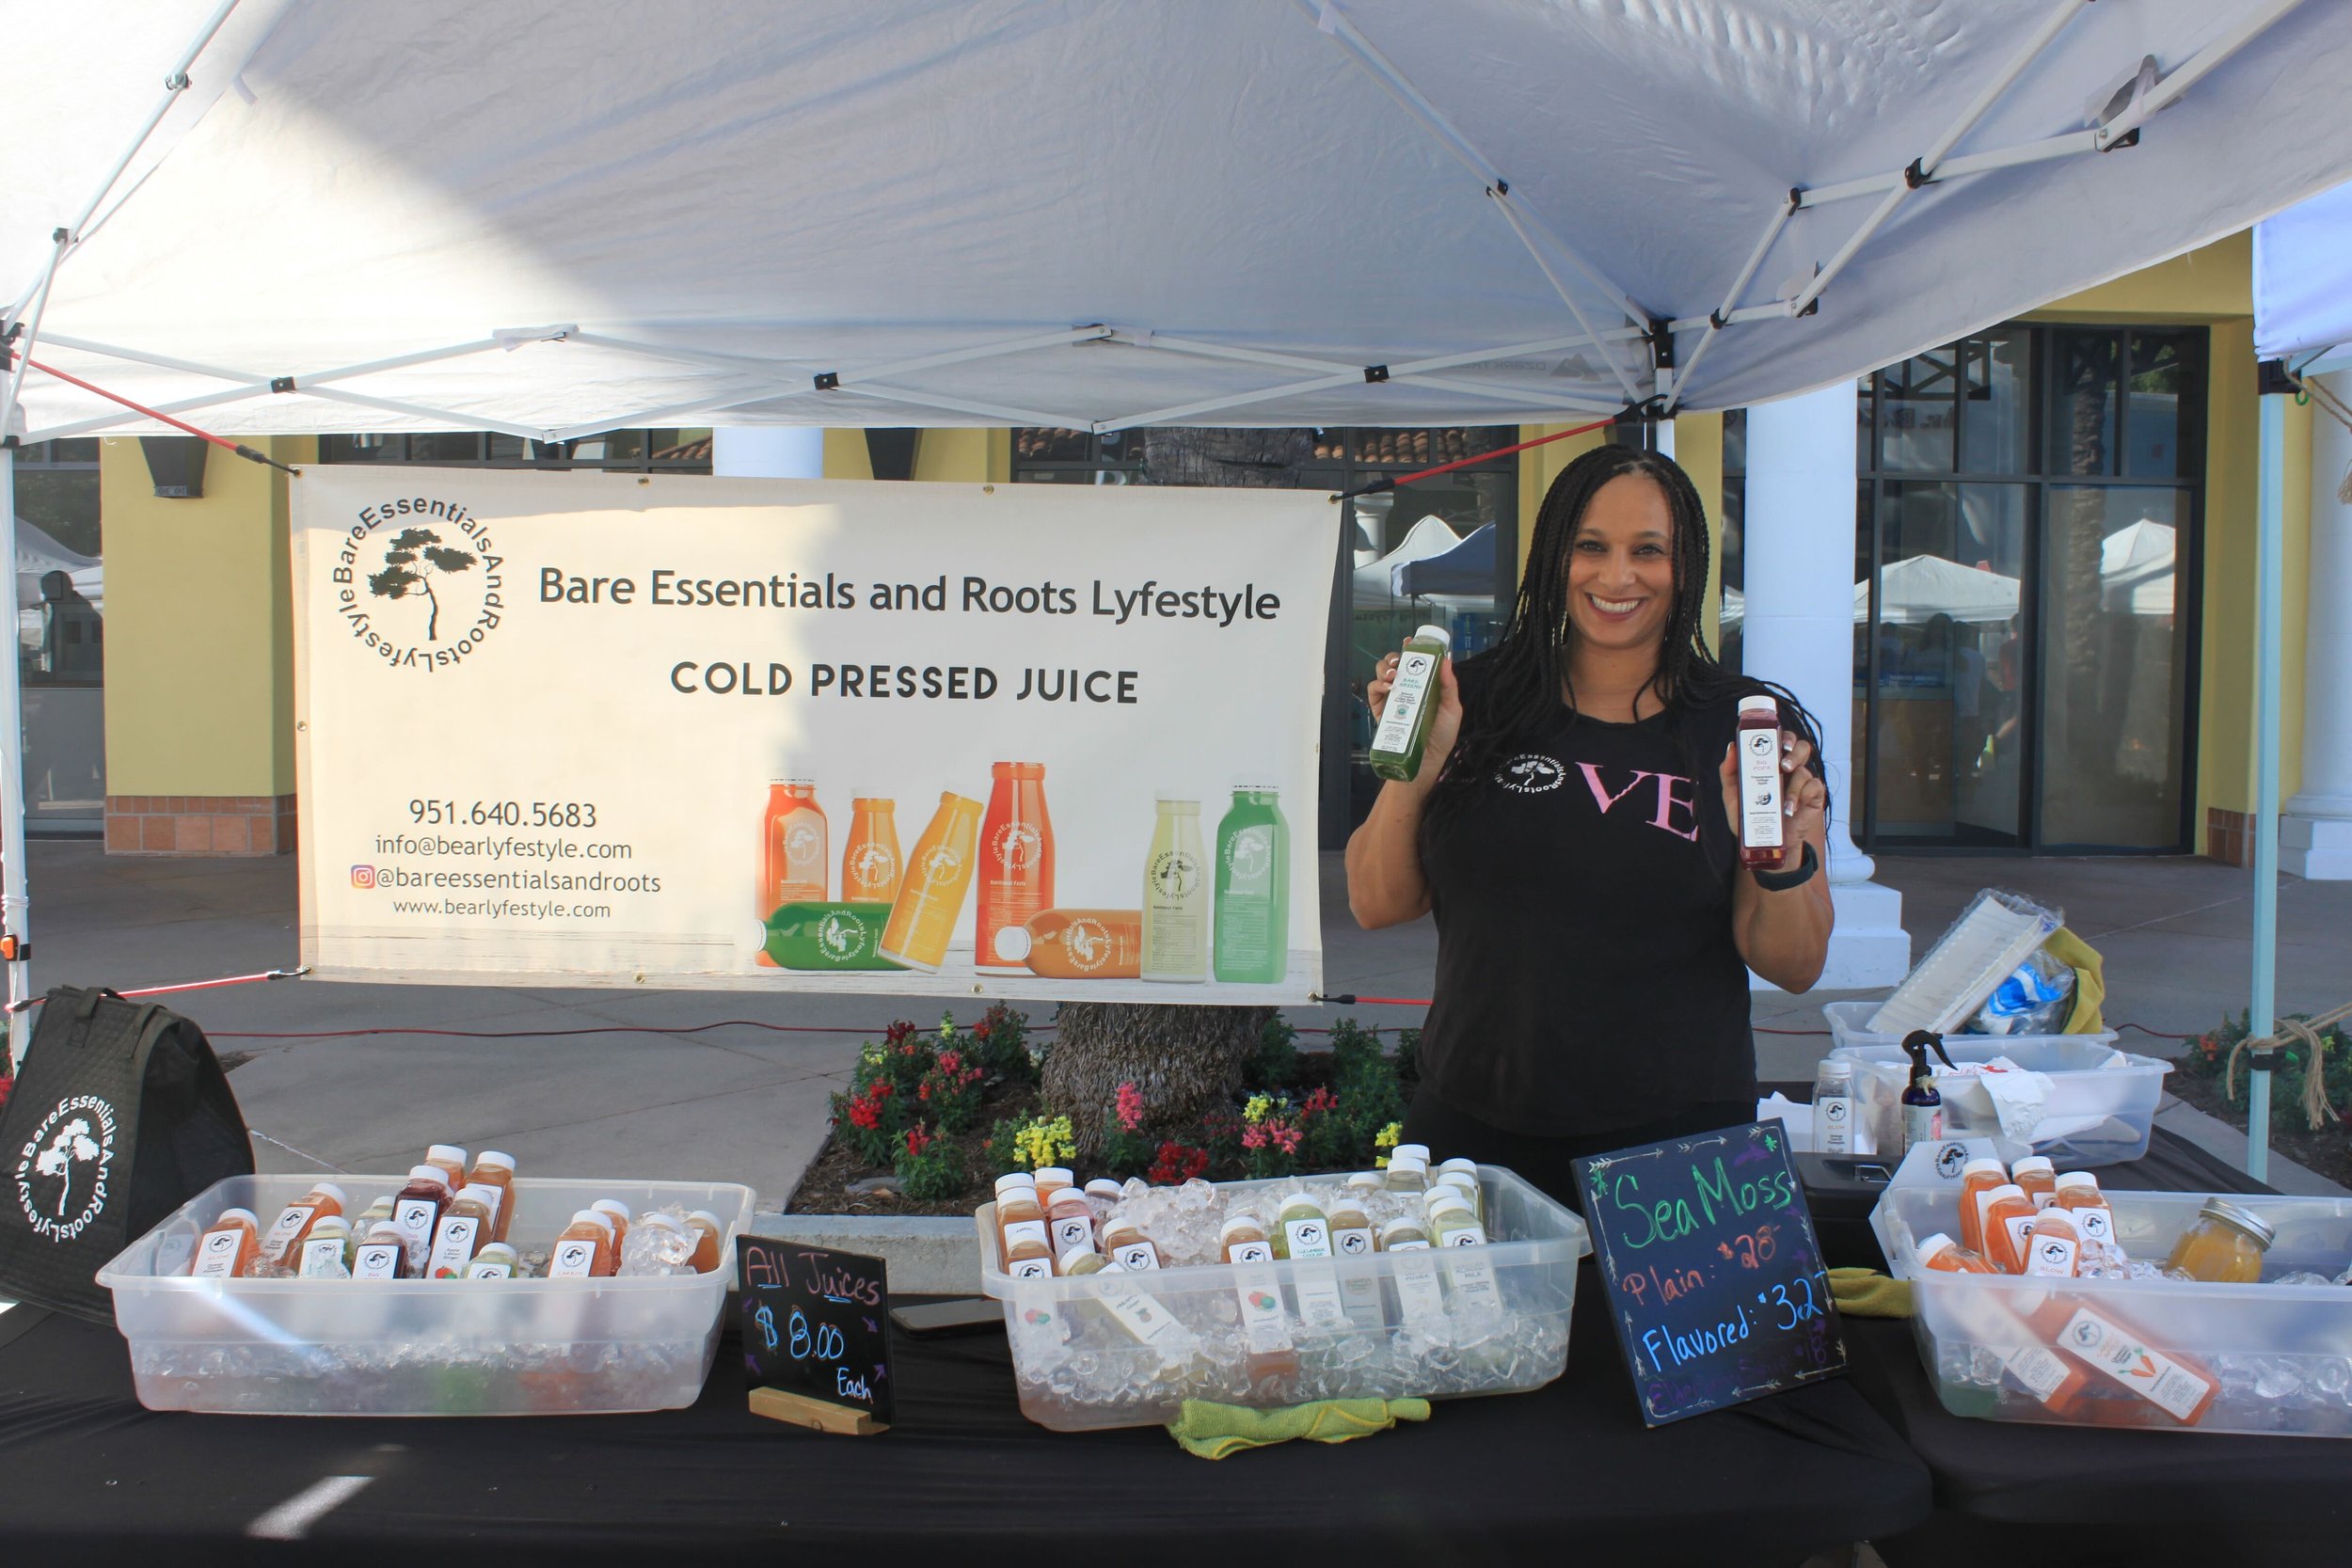  The entrepreneur behind Bare Essentials and Roots Lyfestyle COLD PRESSED JUICE strikes a confident pose, showcasing her products with pride, a snapshot of dedication to wellness and natural goodness. Photo by Jess Rodrigo 